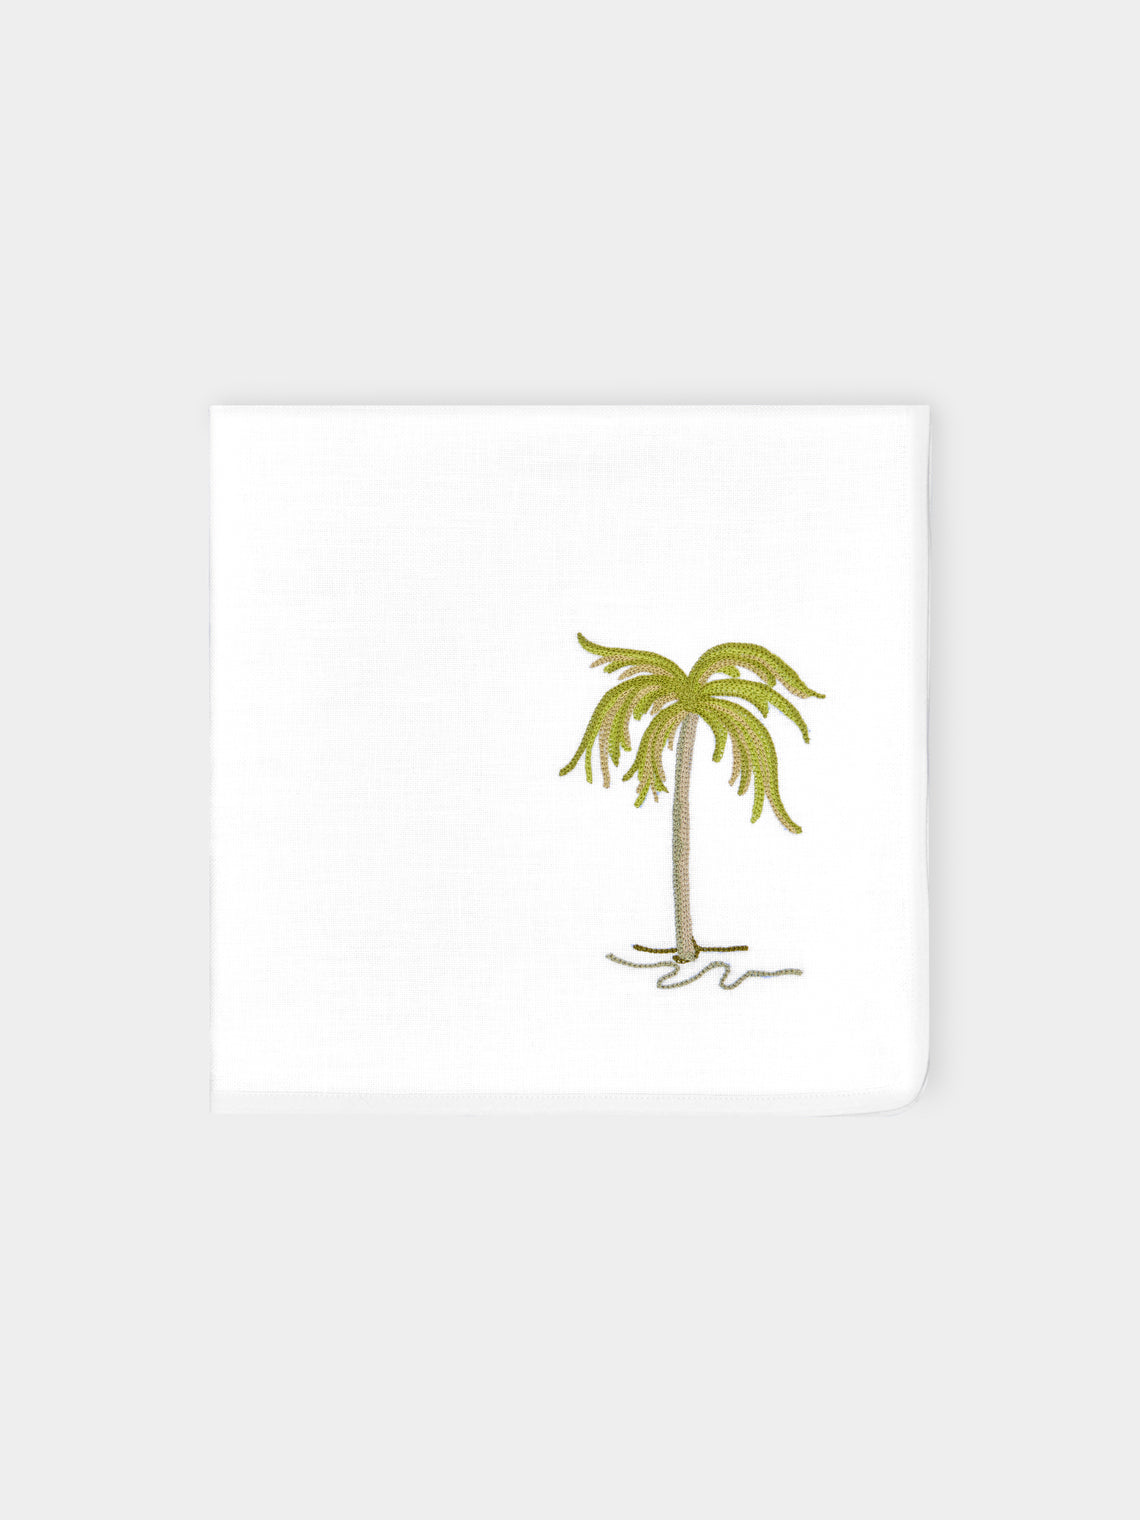 Loretta Caponi - Palm Tree Hand-Embroidered Linen Napkins (Set of 2) -  - ABASK - 